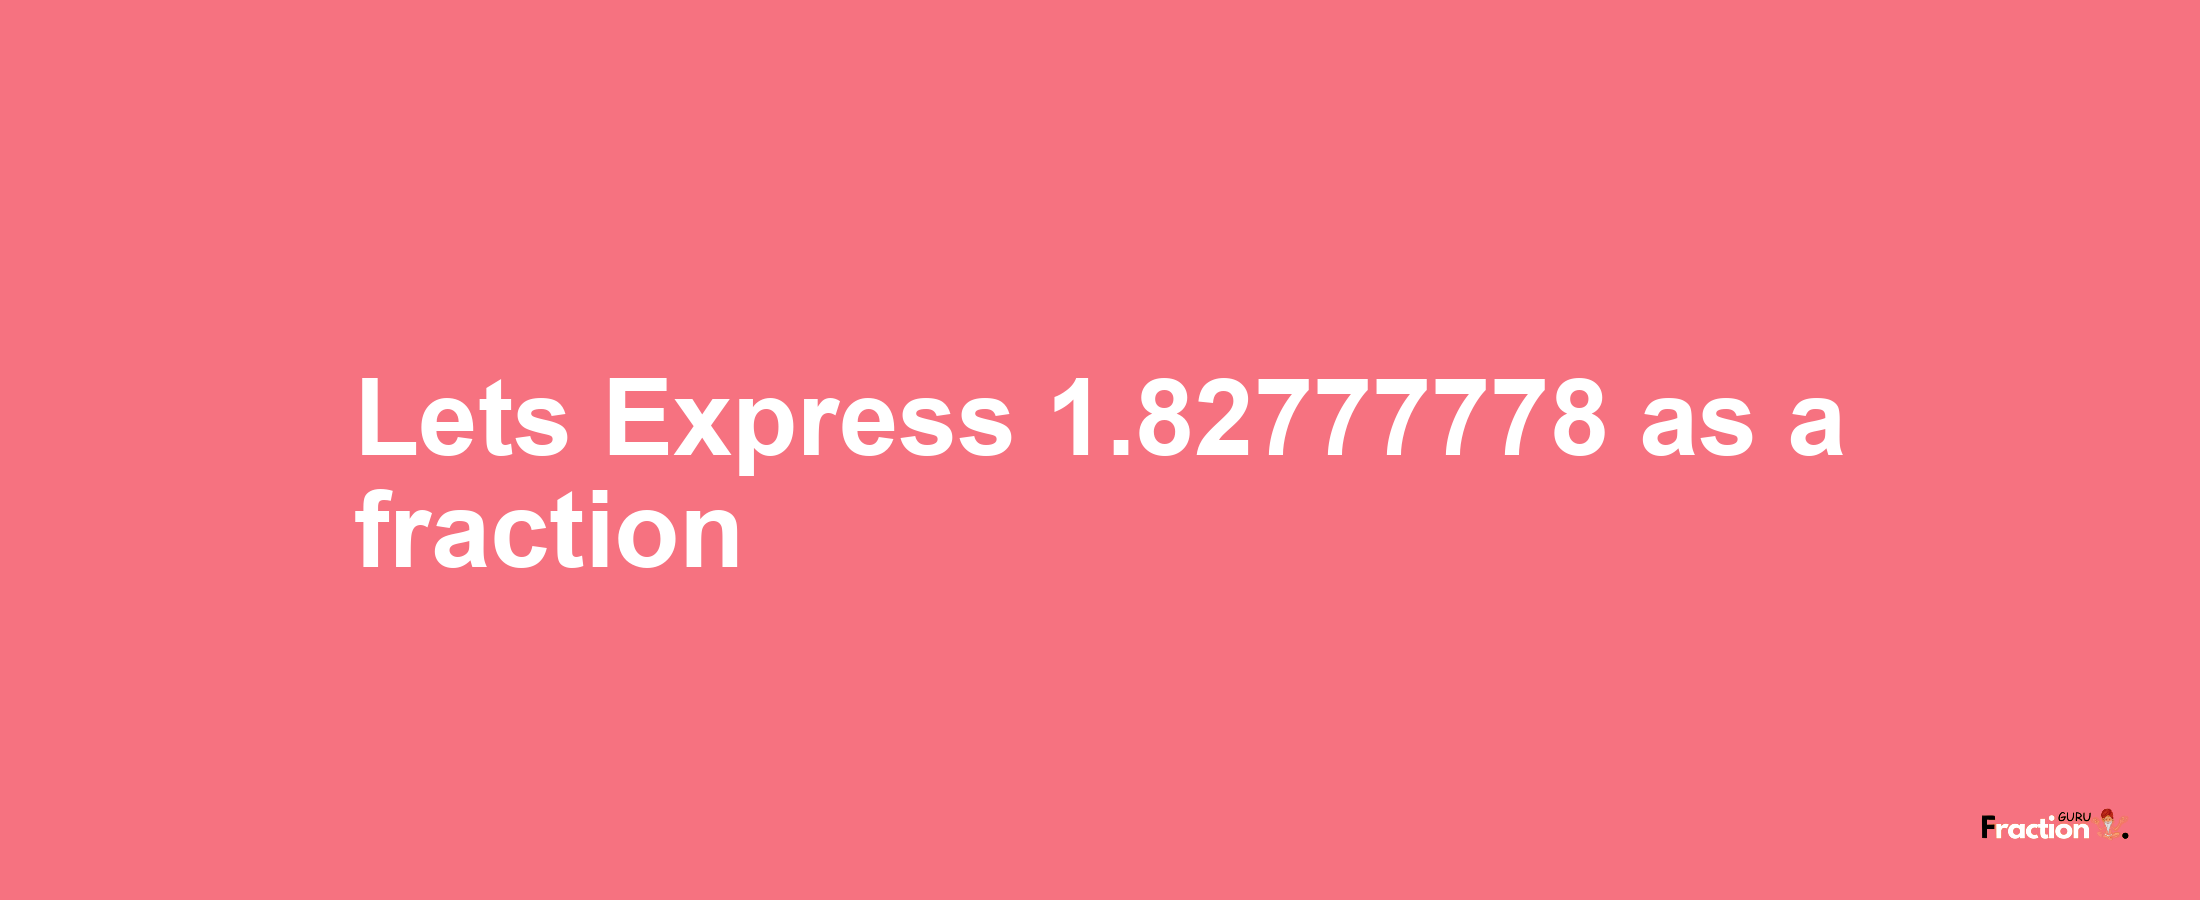 Lets Express 1.82777778 as afraction